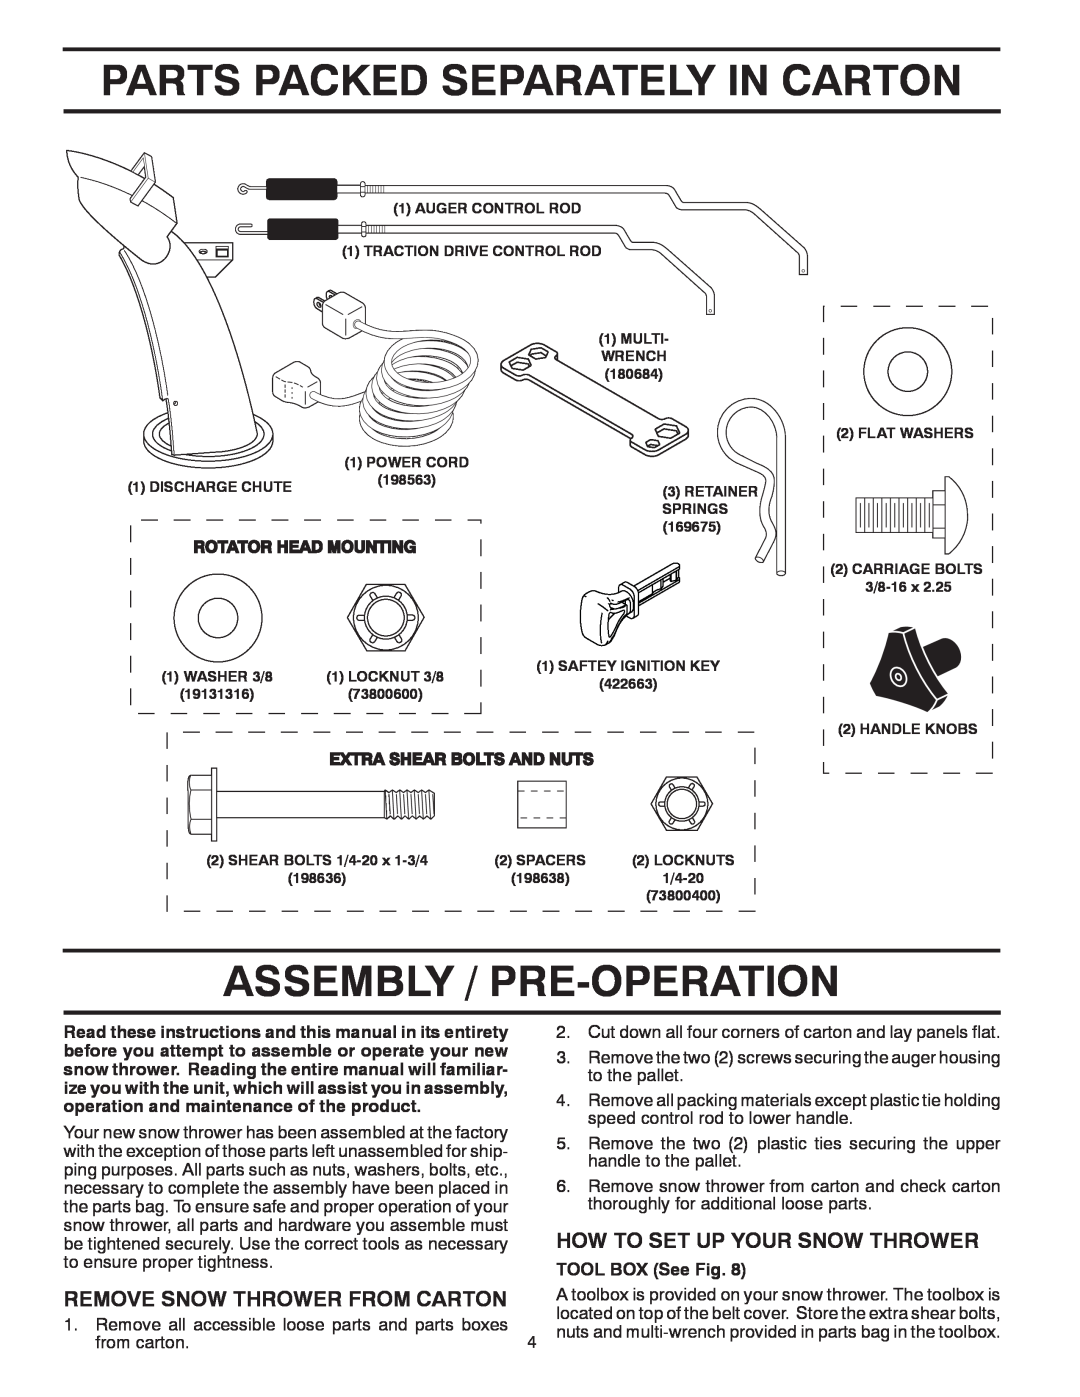 Poulan 424704, PR5524ESLCT Parts Packed Separately In Carton, Assembly / Pre-Operation, How To Set Up Your Snow Thrower 